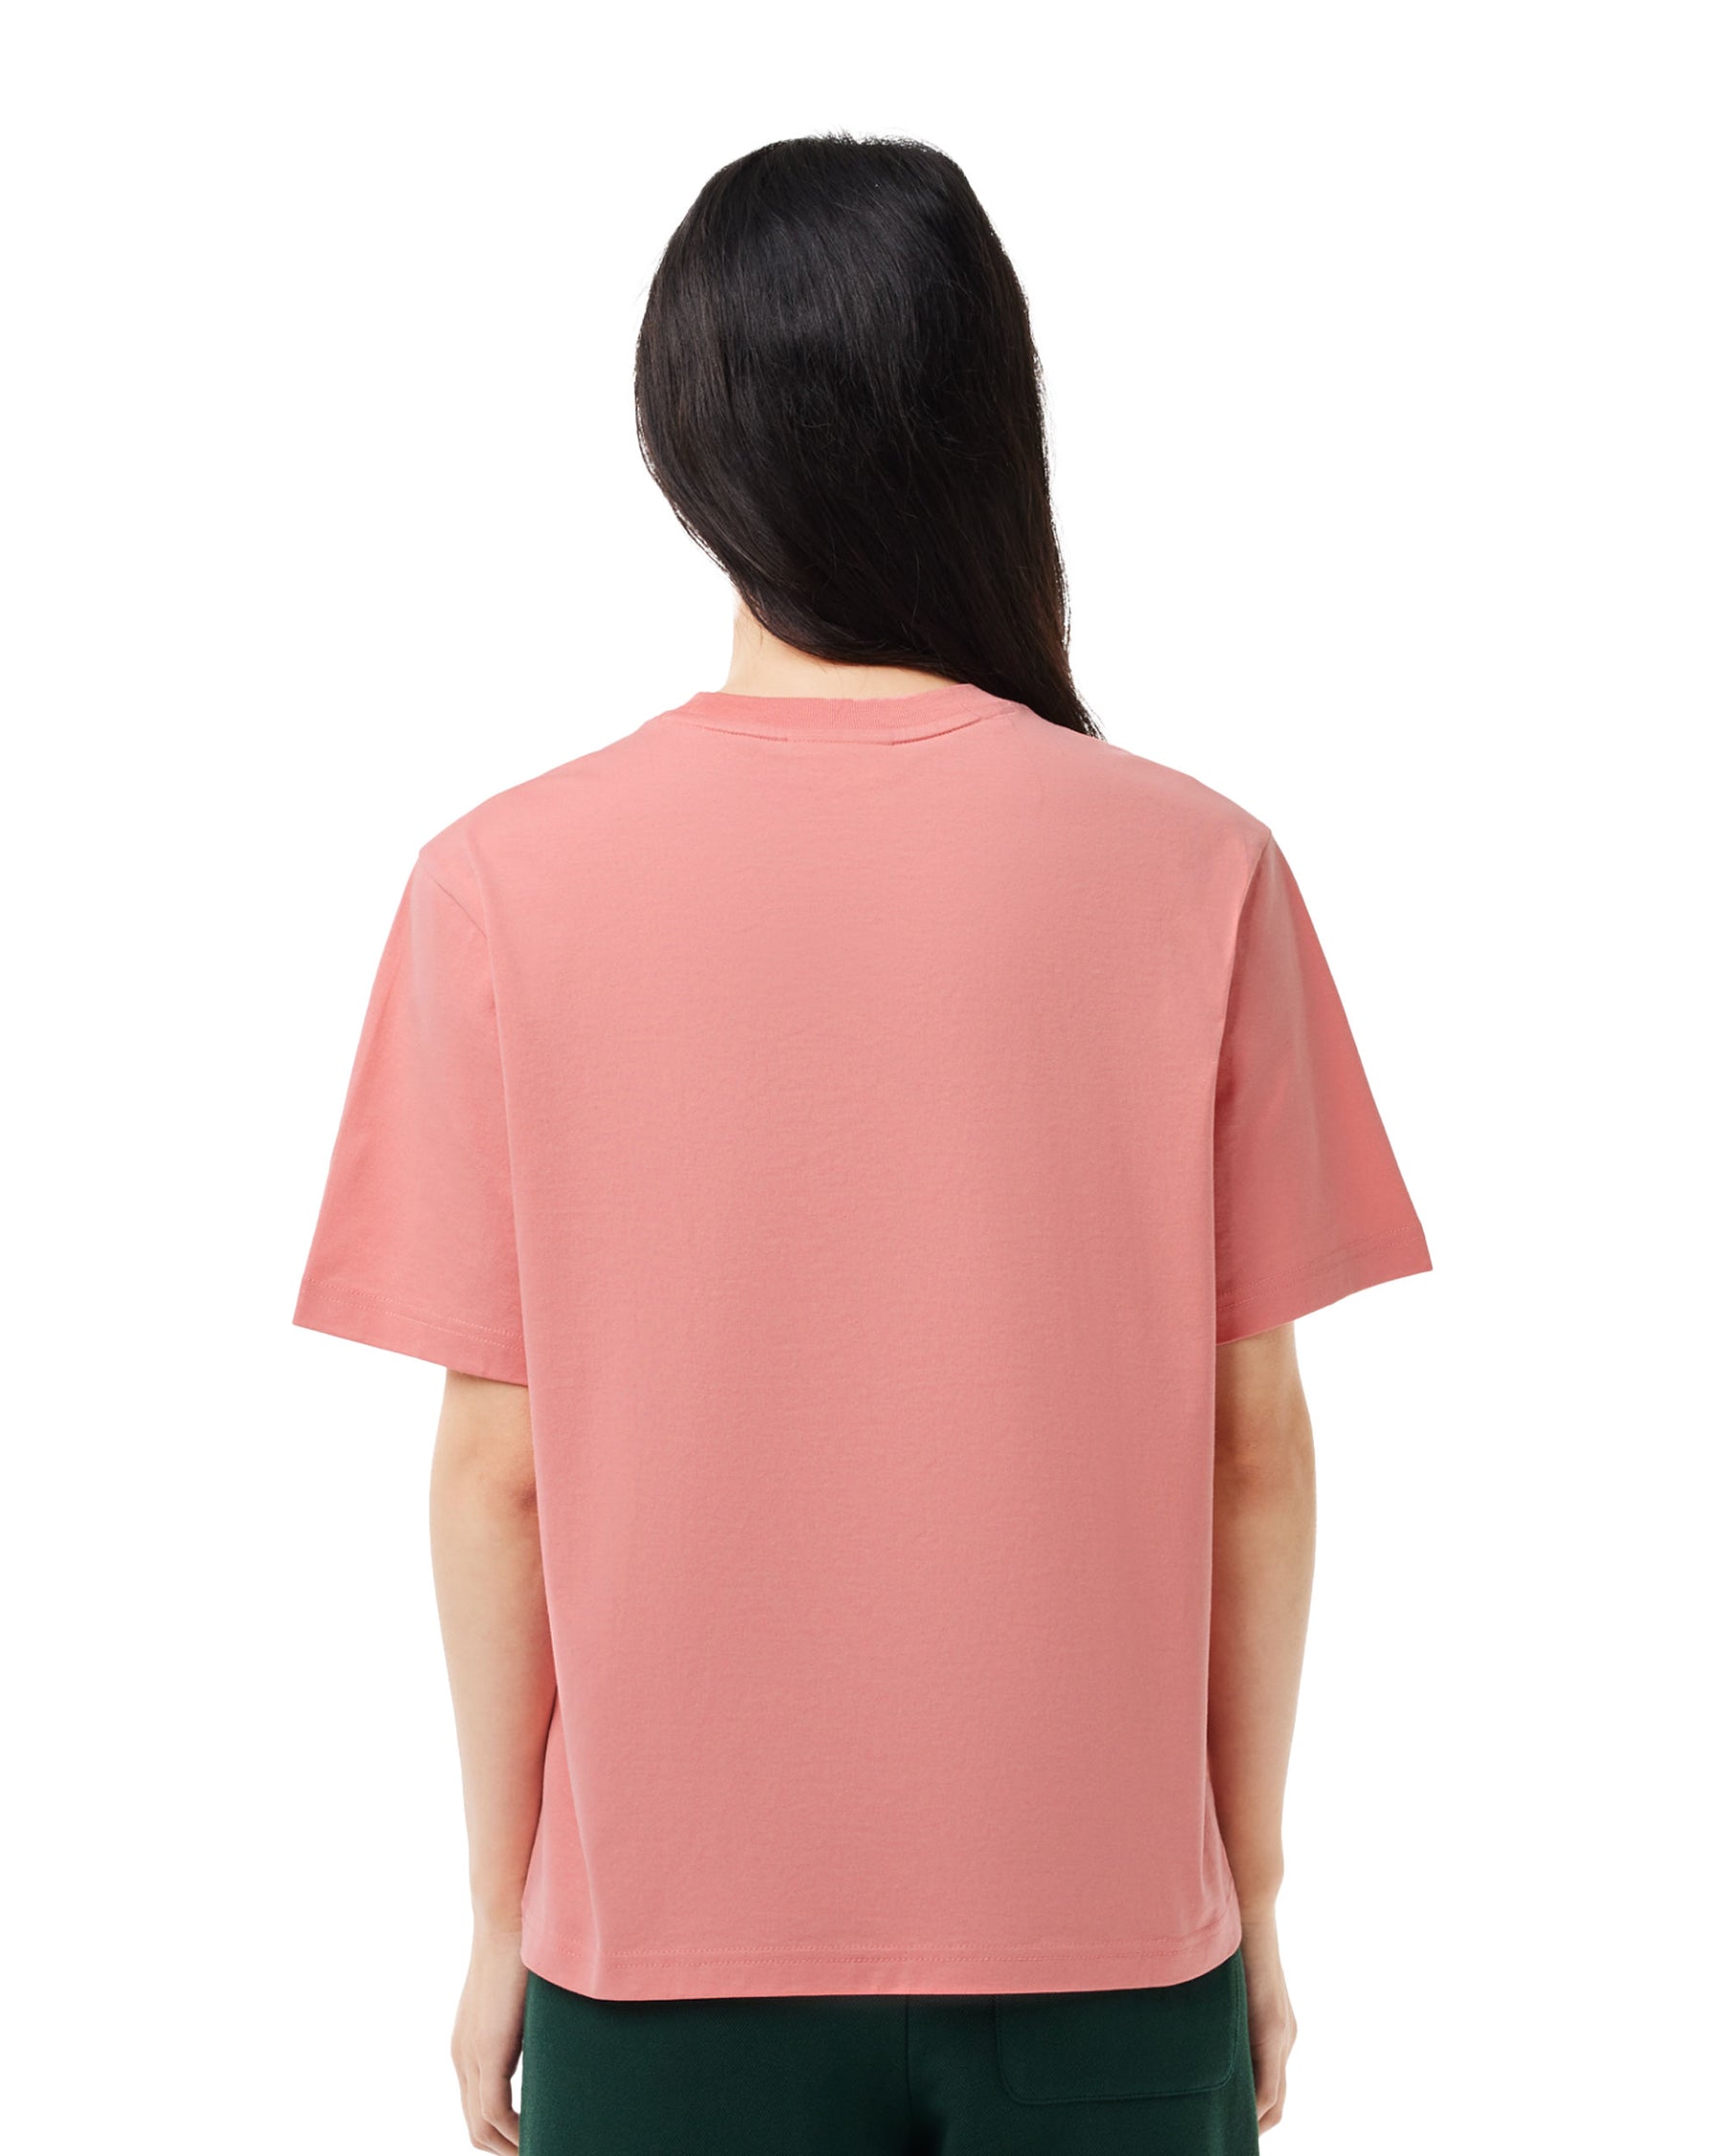 Woman's Tee Lacoste Classic Logo Pink